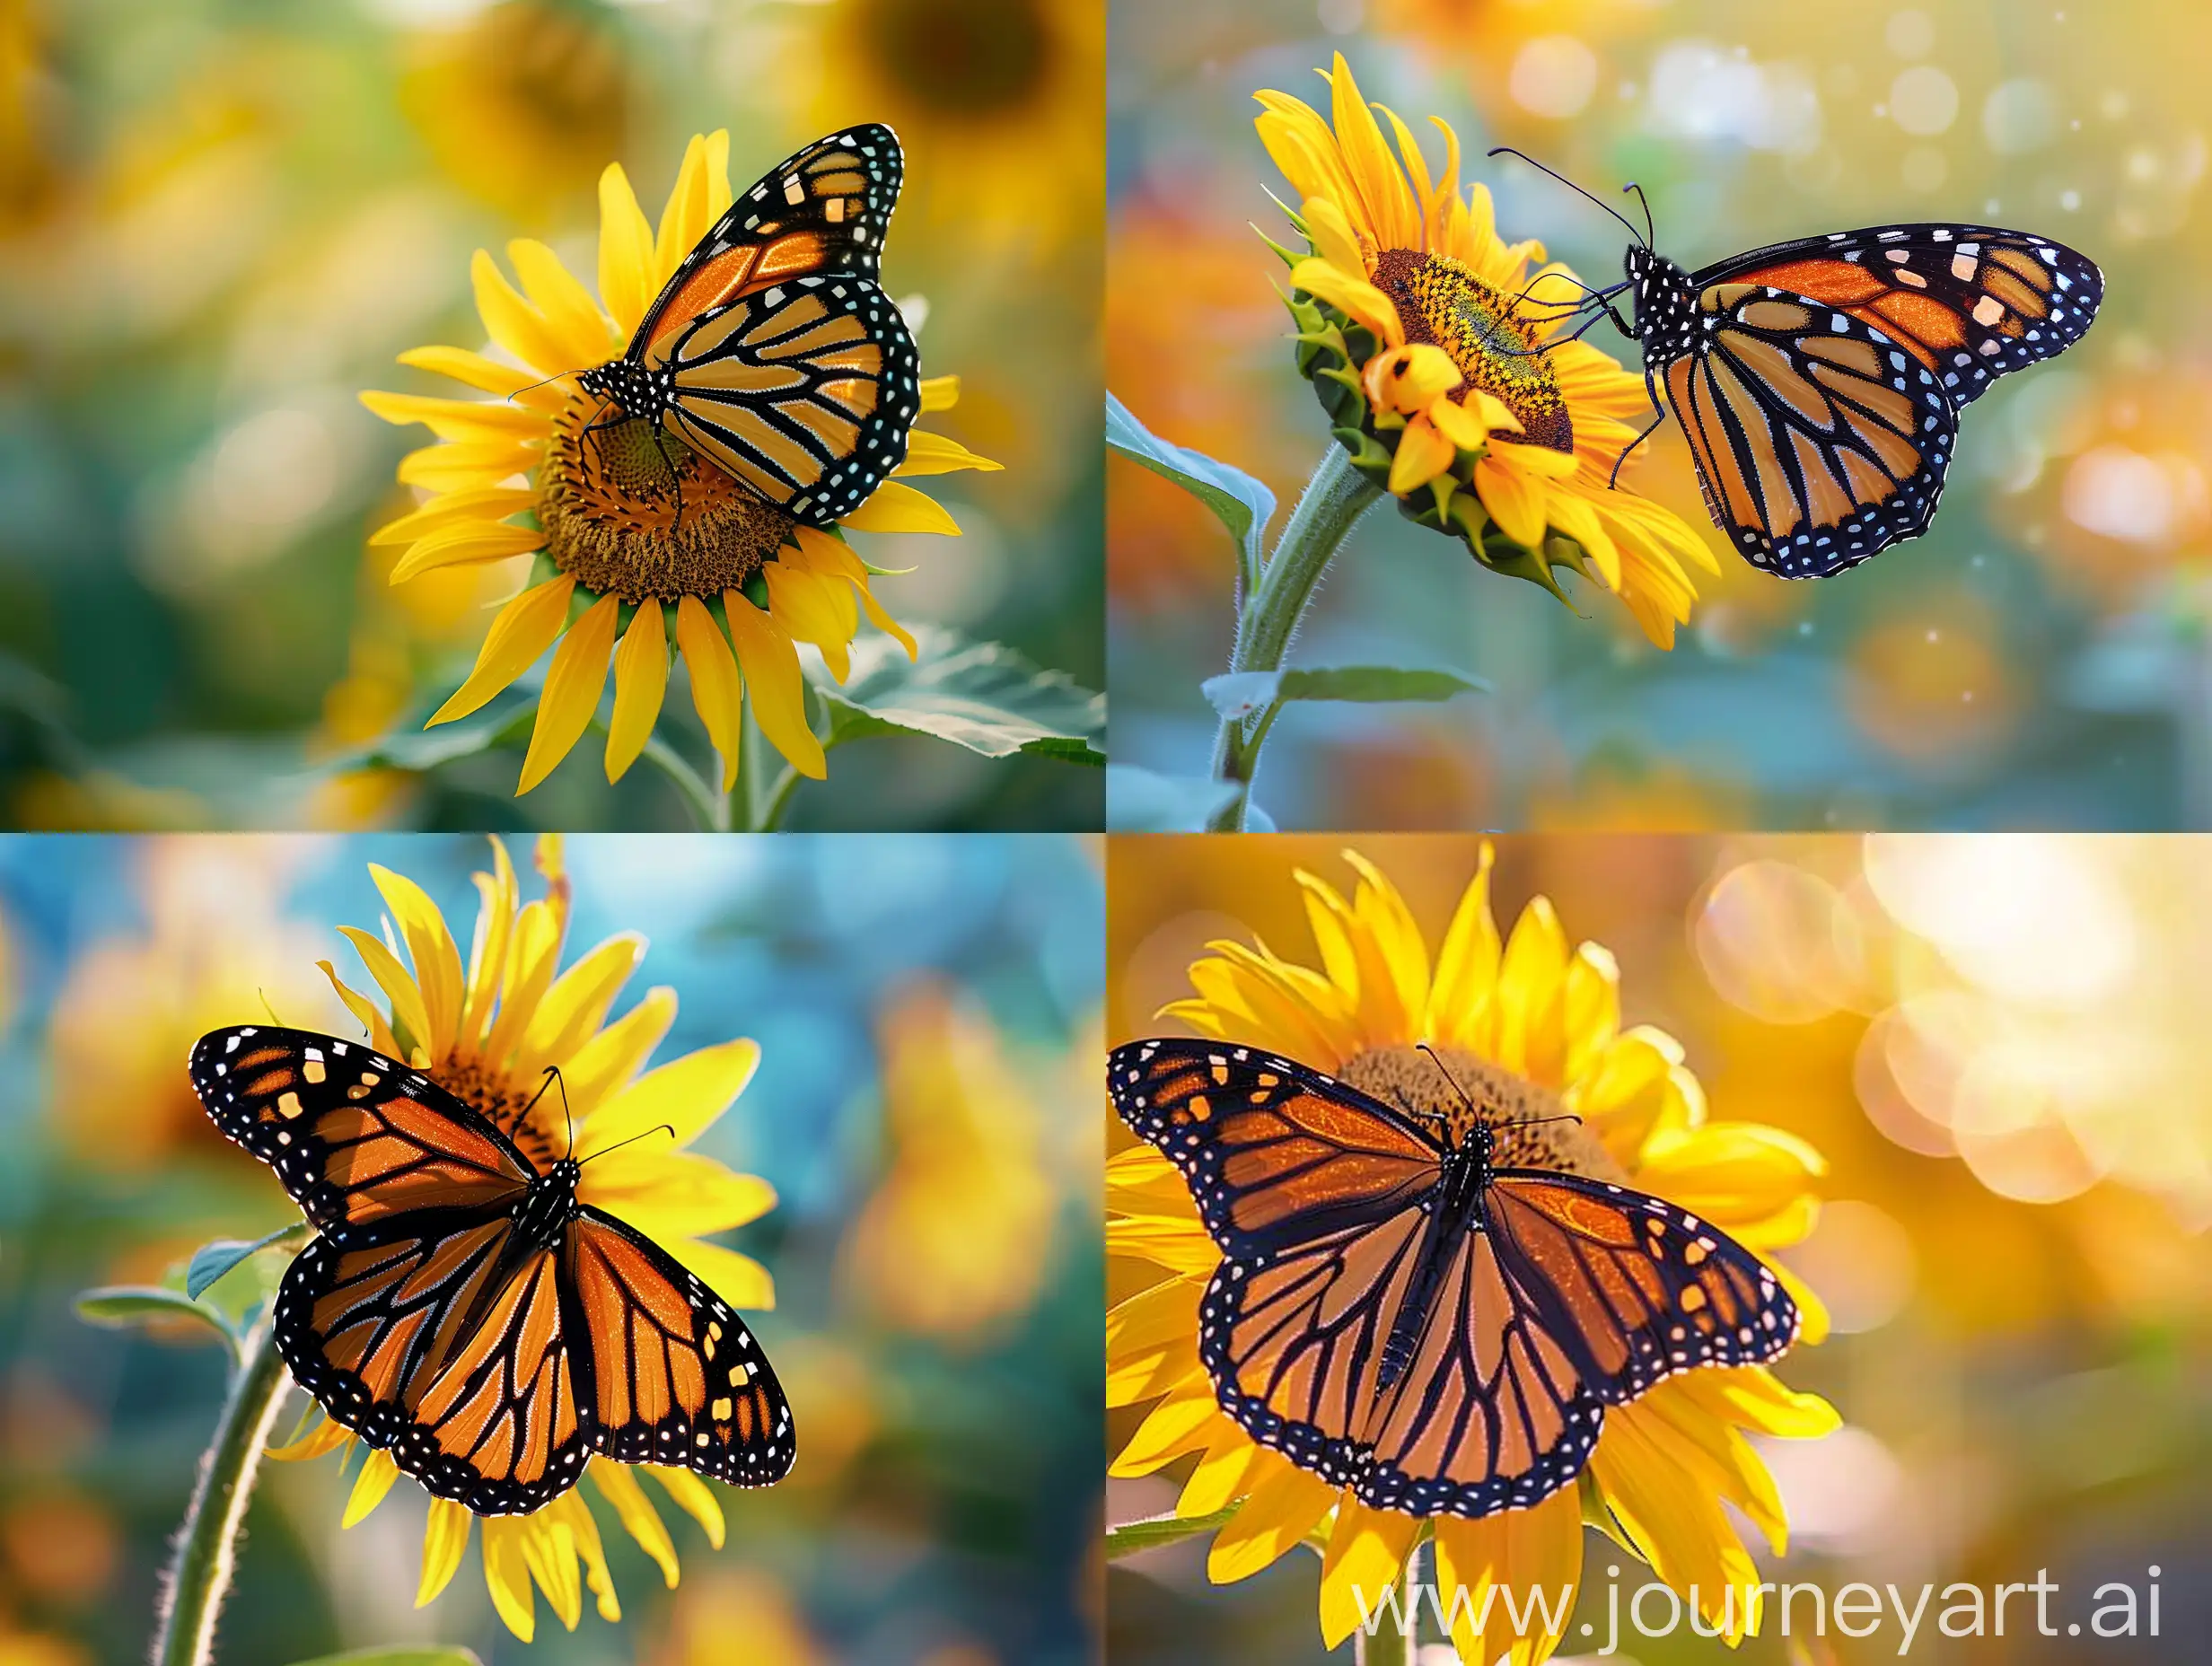 Monarch butterfly on flower. Image of a butterfly Monarch on sunflower with blurry background. Nature stock image of a closeup insect. Most beautiful imaging of a wings butterfly on flowers.